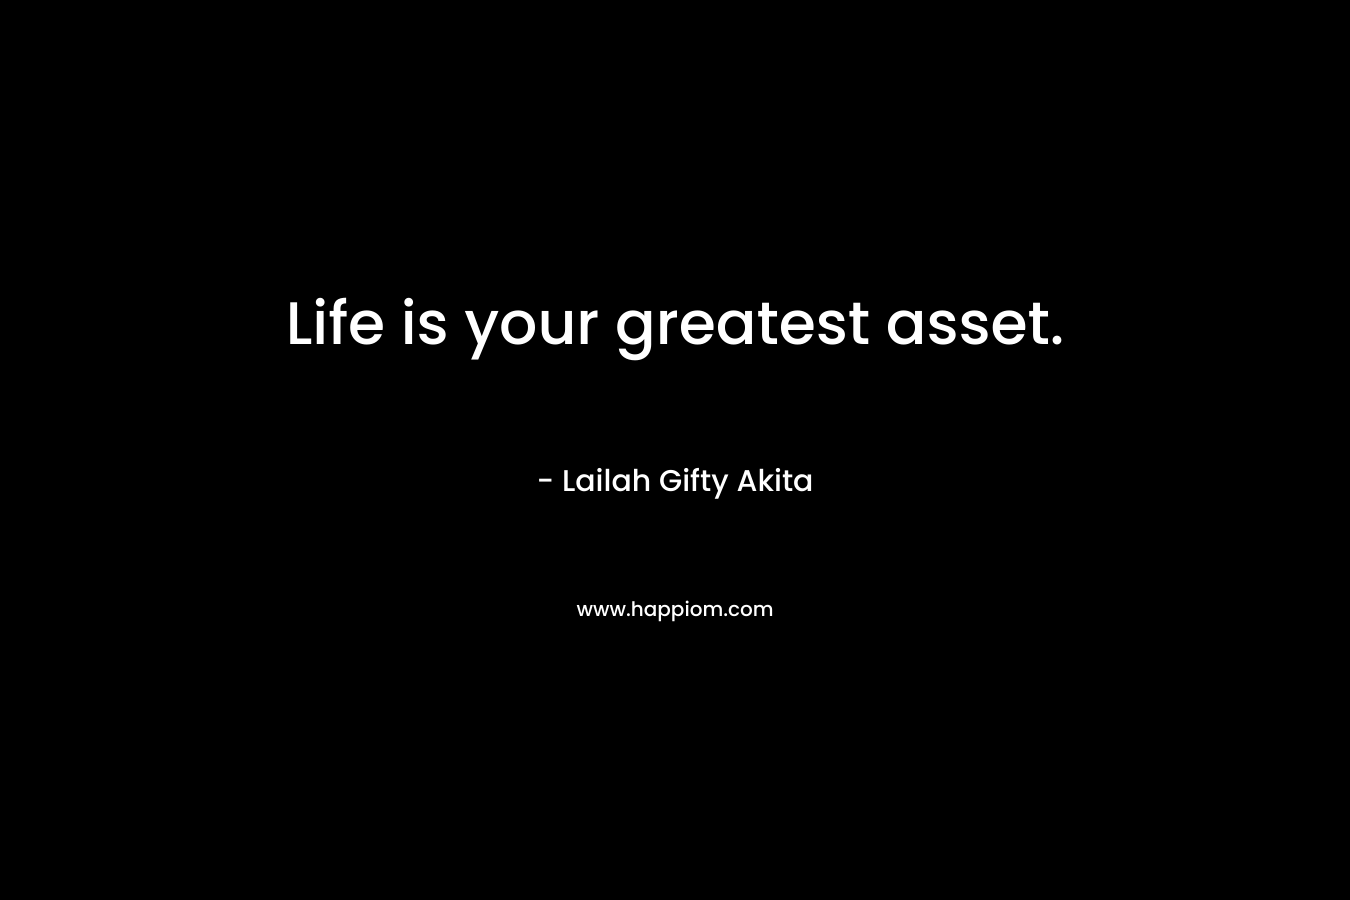 Life is your greatest asset.